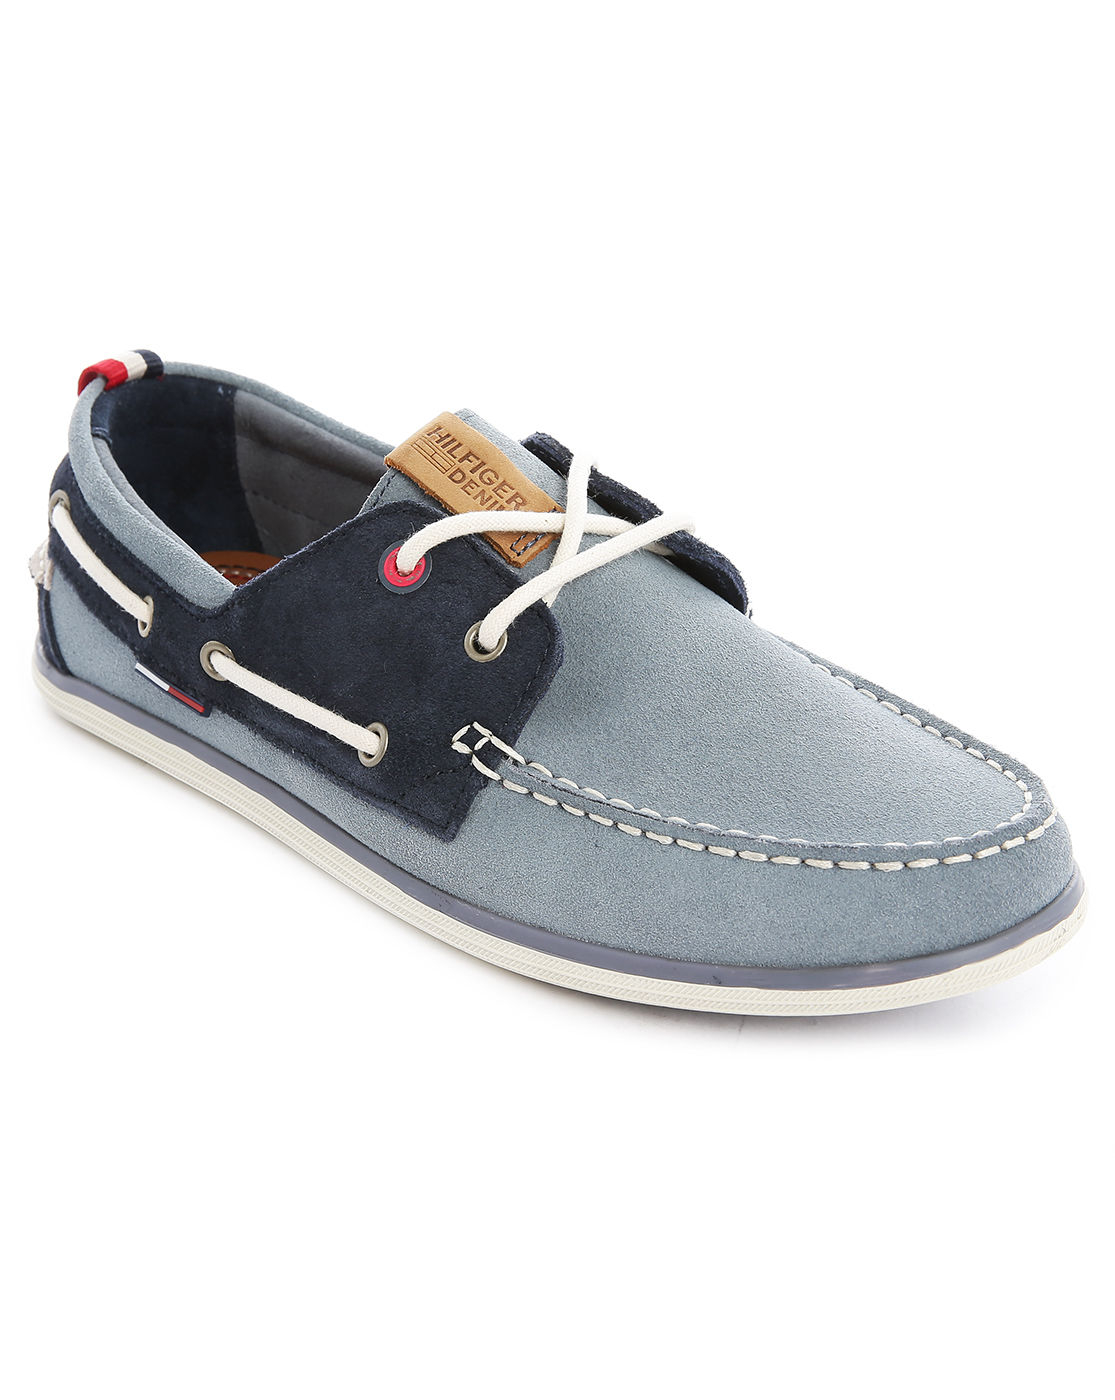 Tommy hilfiger Miles Twotone Blue Suede Boat Shoes in